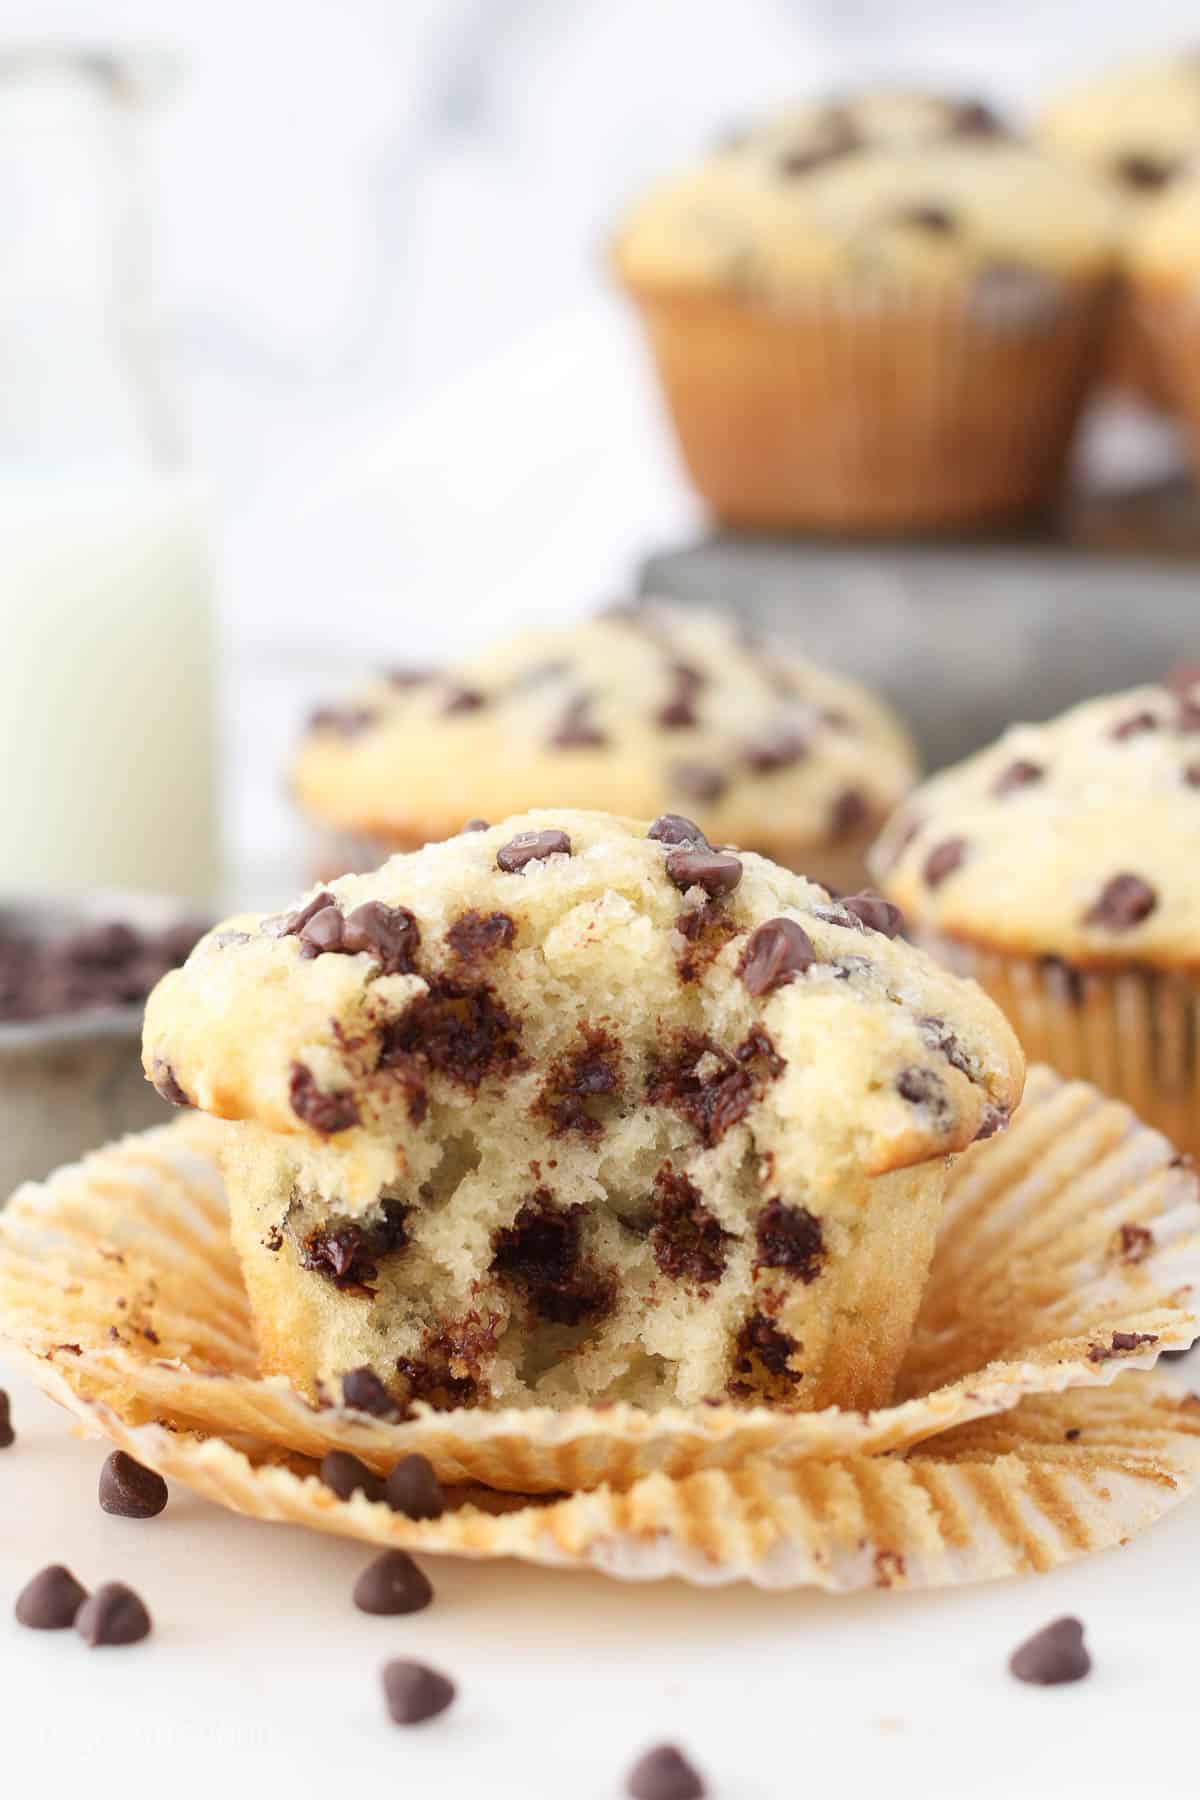 Front view of a chocolate chip muffin with a bite missing